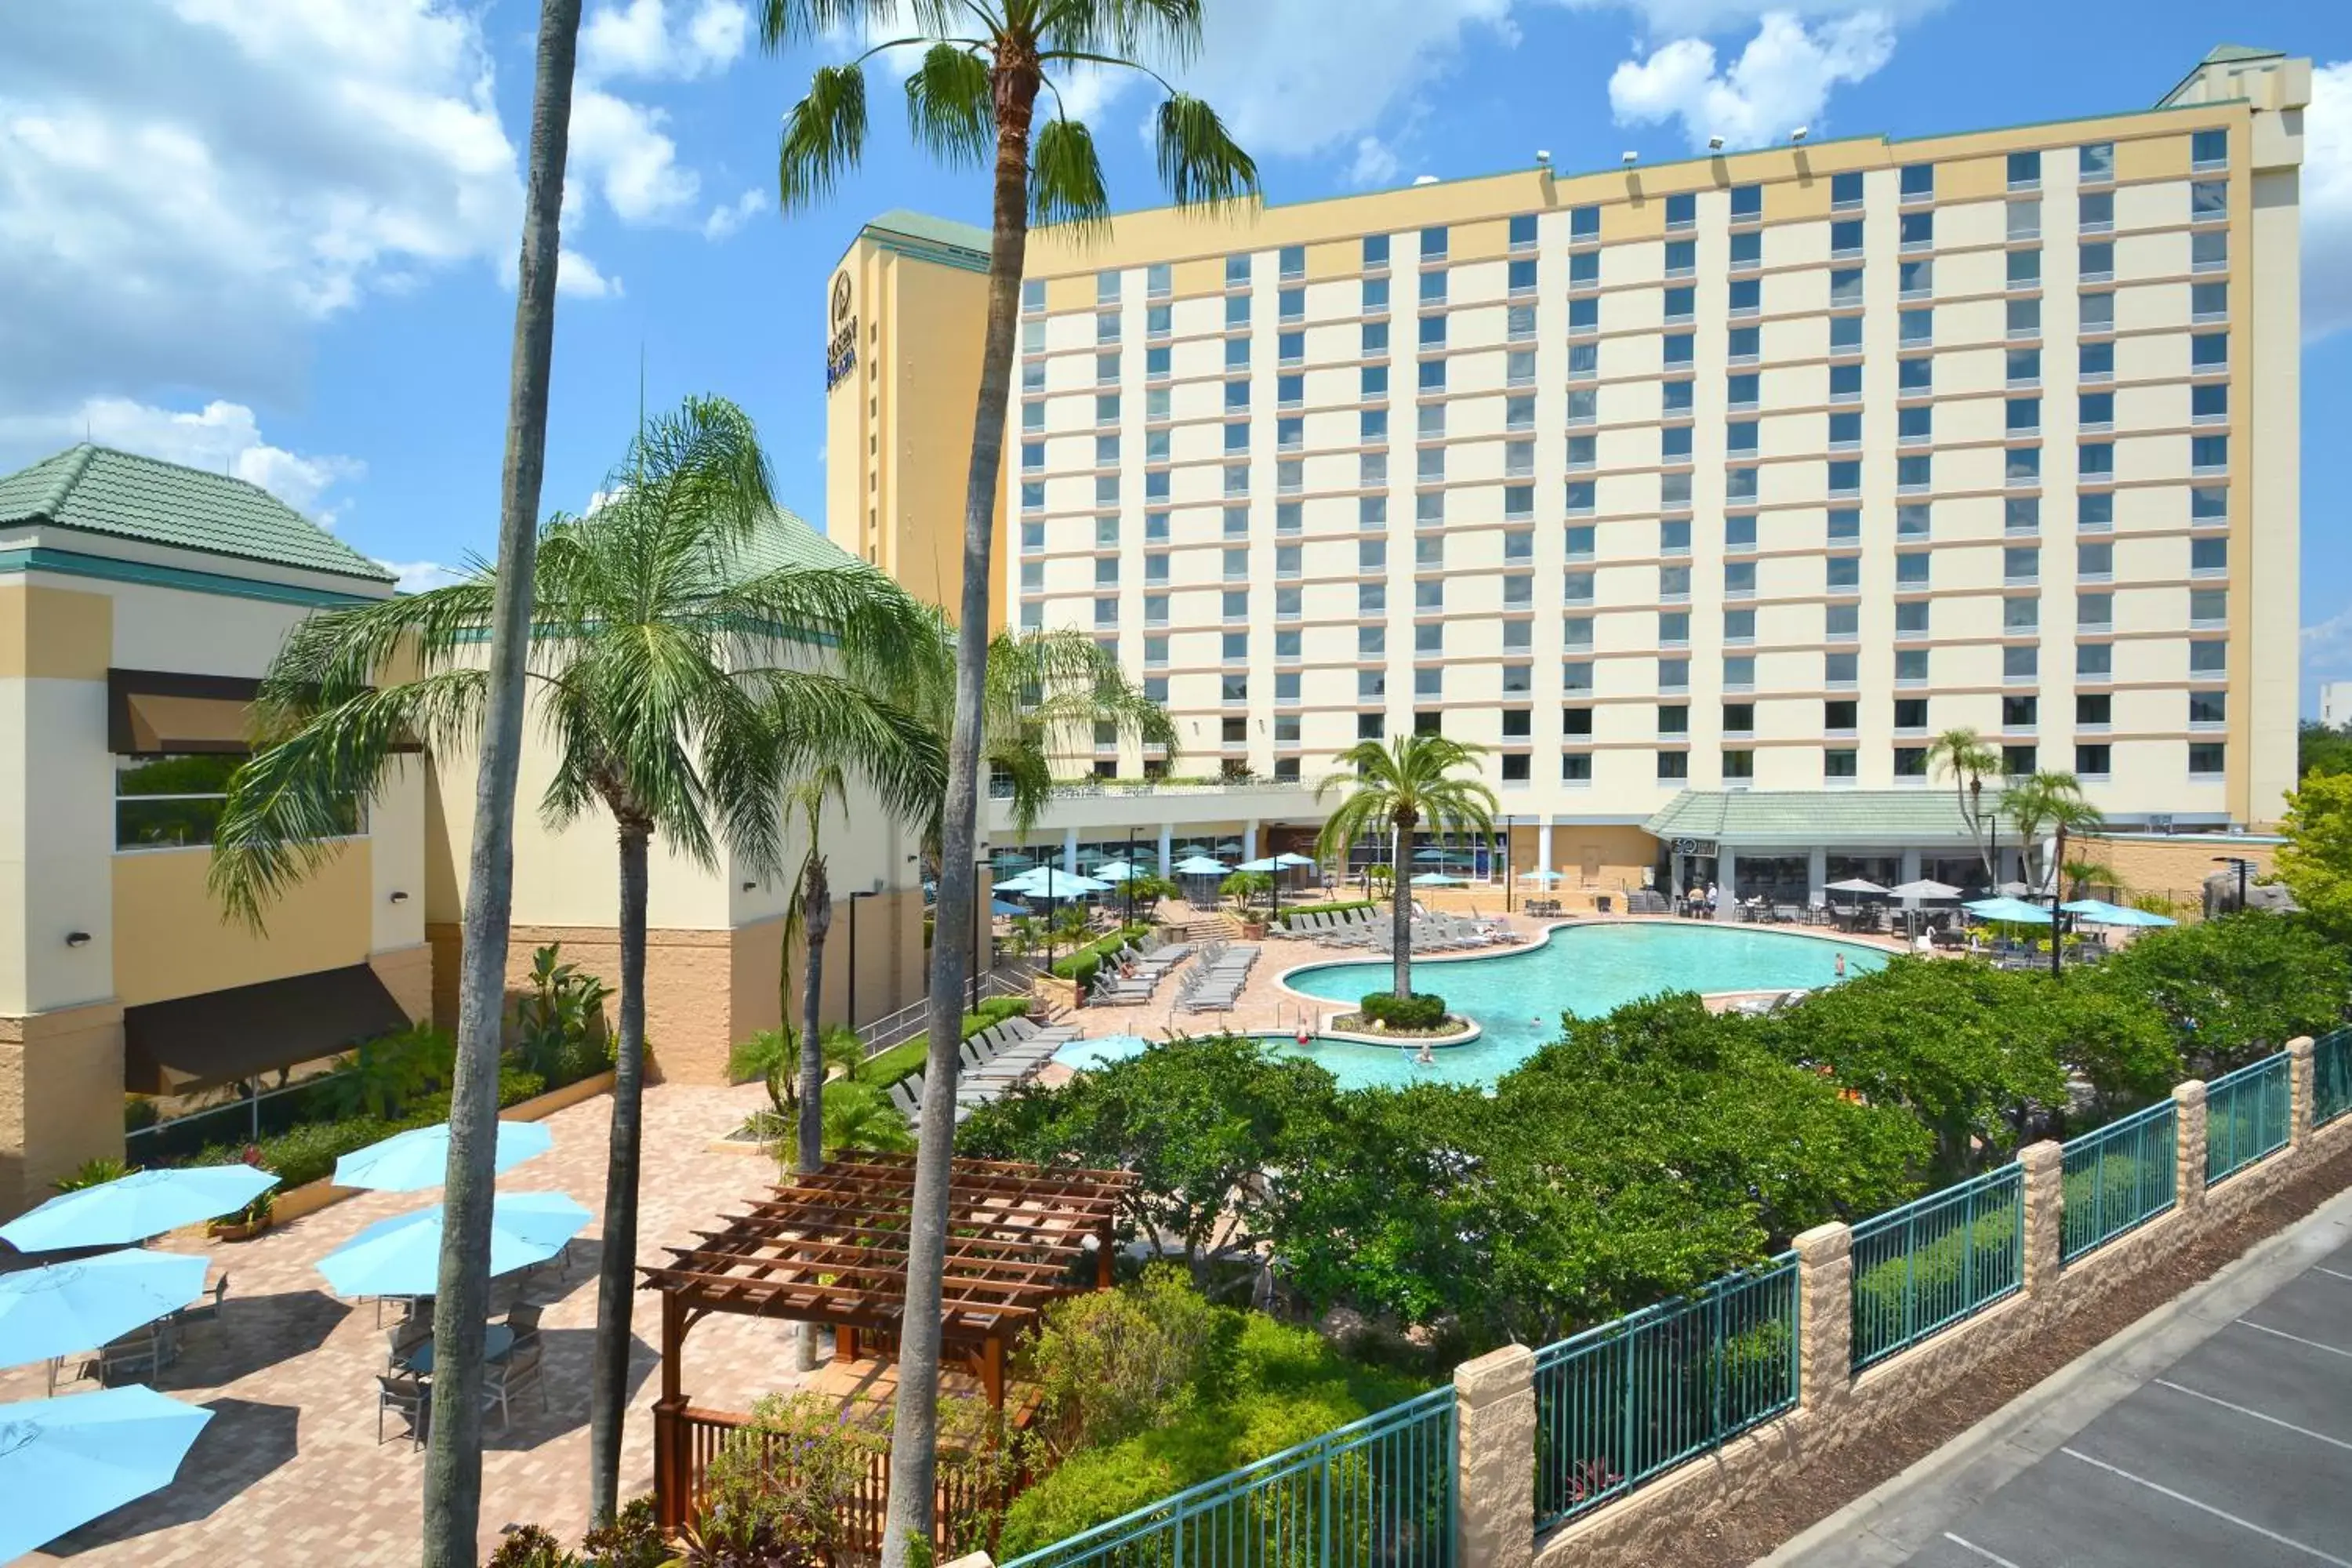 Property building, Pool View in Rosen Plaza Hotel Orlando Convention Center